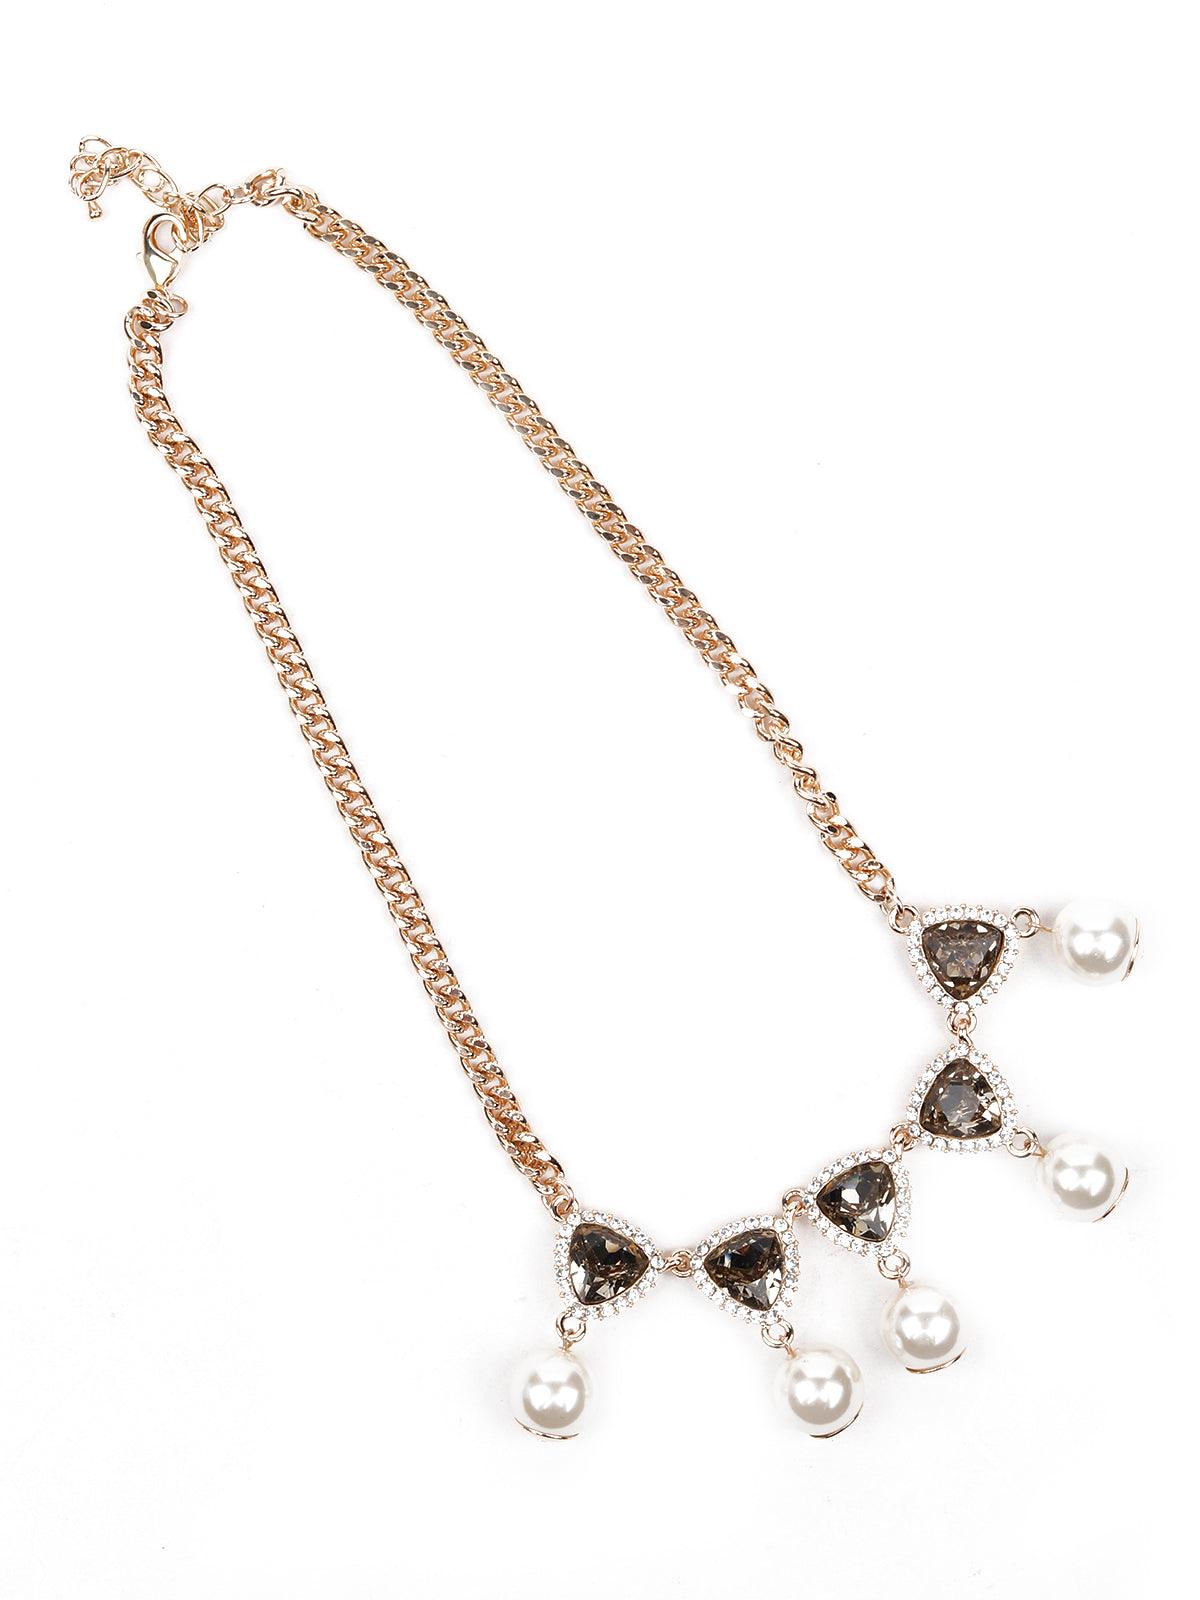 Women's Gold-Tone Textured Pearl Statement Necklace - Odette